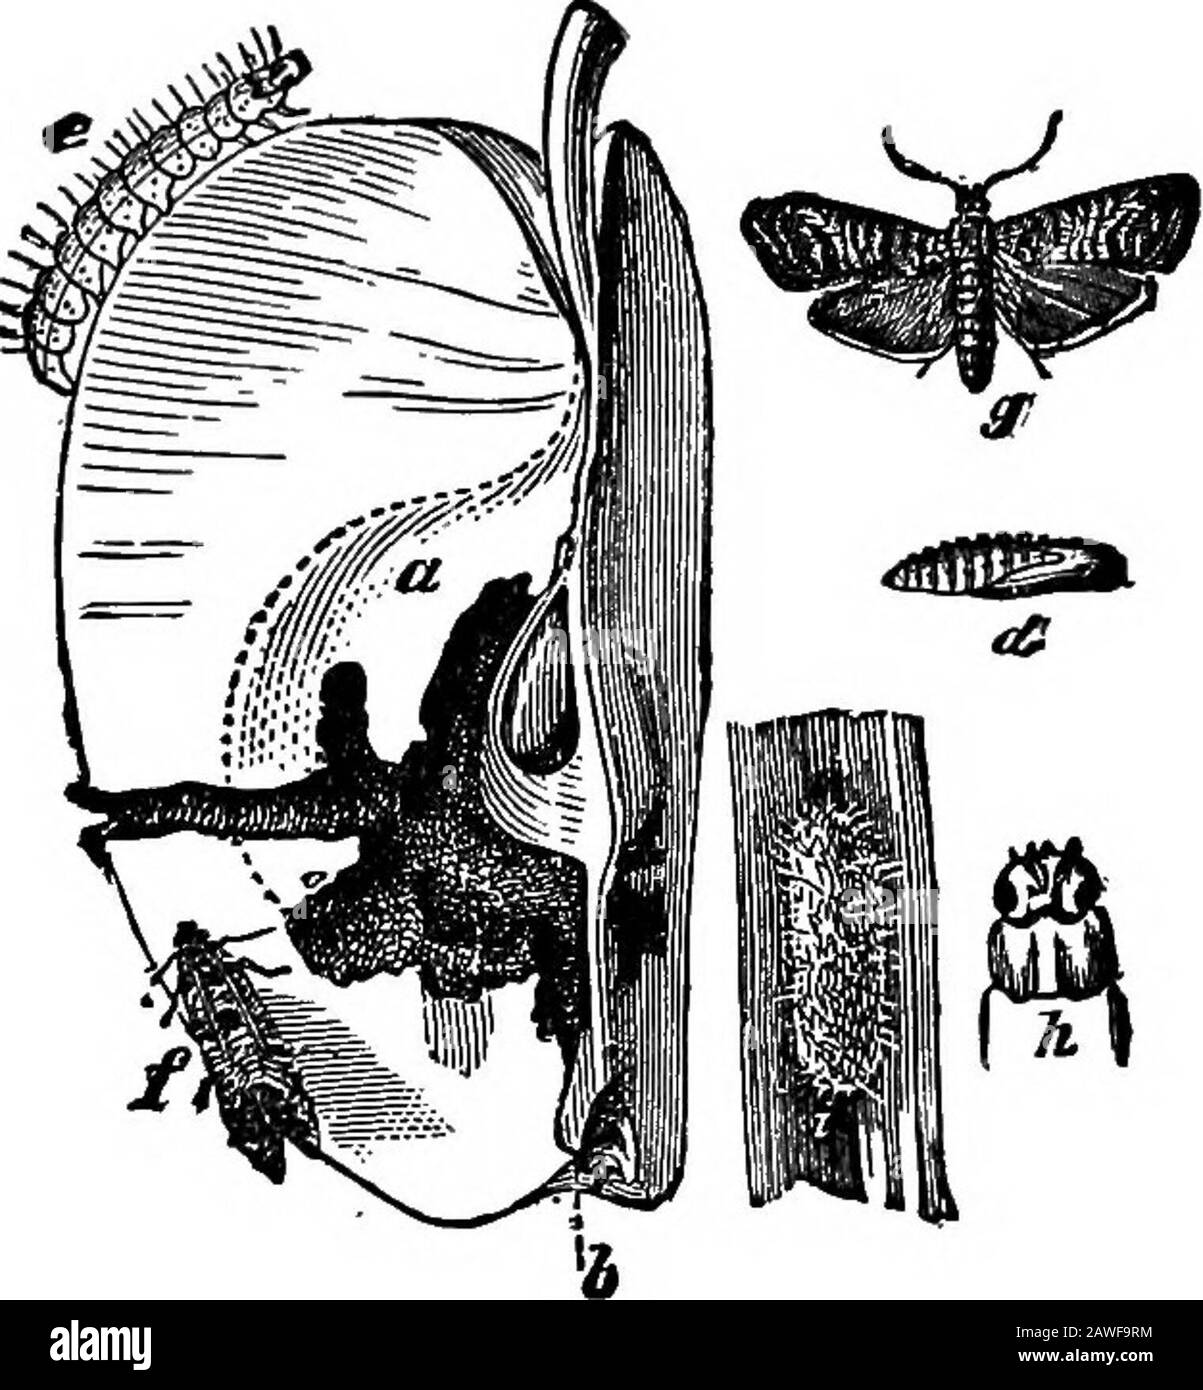 Productive farming . The worst insectenemy to apple growing is the codling-moth, the larva ofwhich is the apple worm. The markets of the cities do notwant wormy apples. The insect which thus destroys theapple crop is shown in Fig. 132. The larva spins a nest orcase in the crevices about the trunk of the tree where it hvesover winter. The adult emerges in warm spring weather,and lays eggs in the blossom end of the little apple just afterthe petals fall from the tree (see Fig. 150 C). The larva eatsits way into the fruit and feeds about the center. When INSECTS 215 fully fed, it crawls out and l Stock Photo